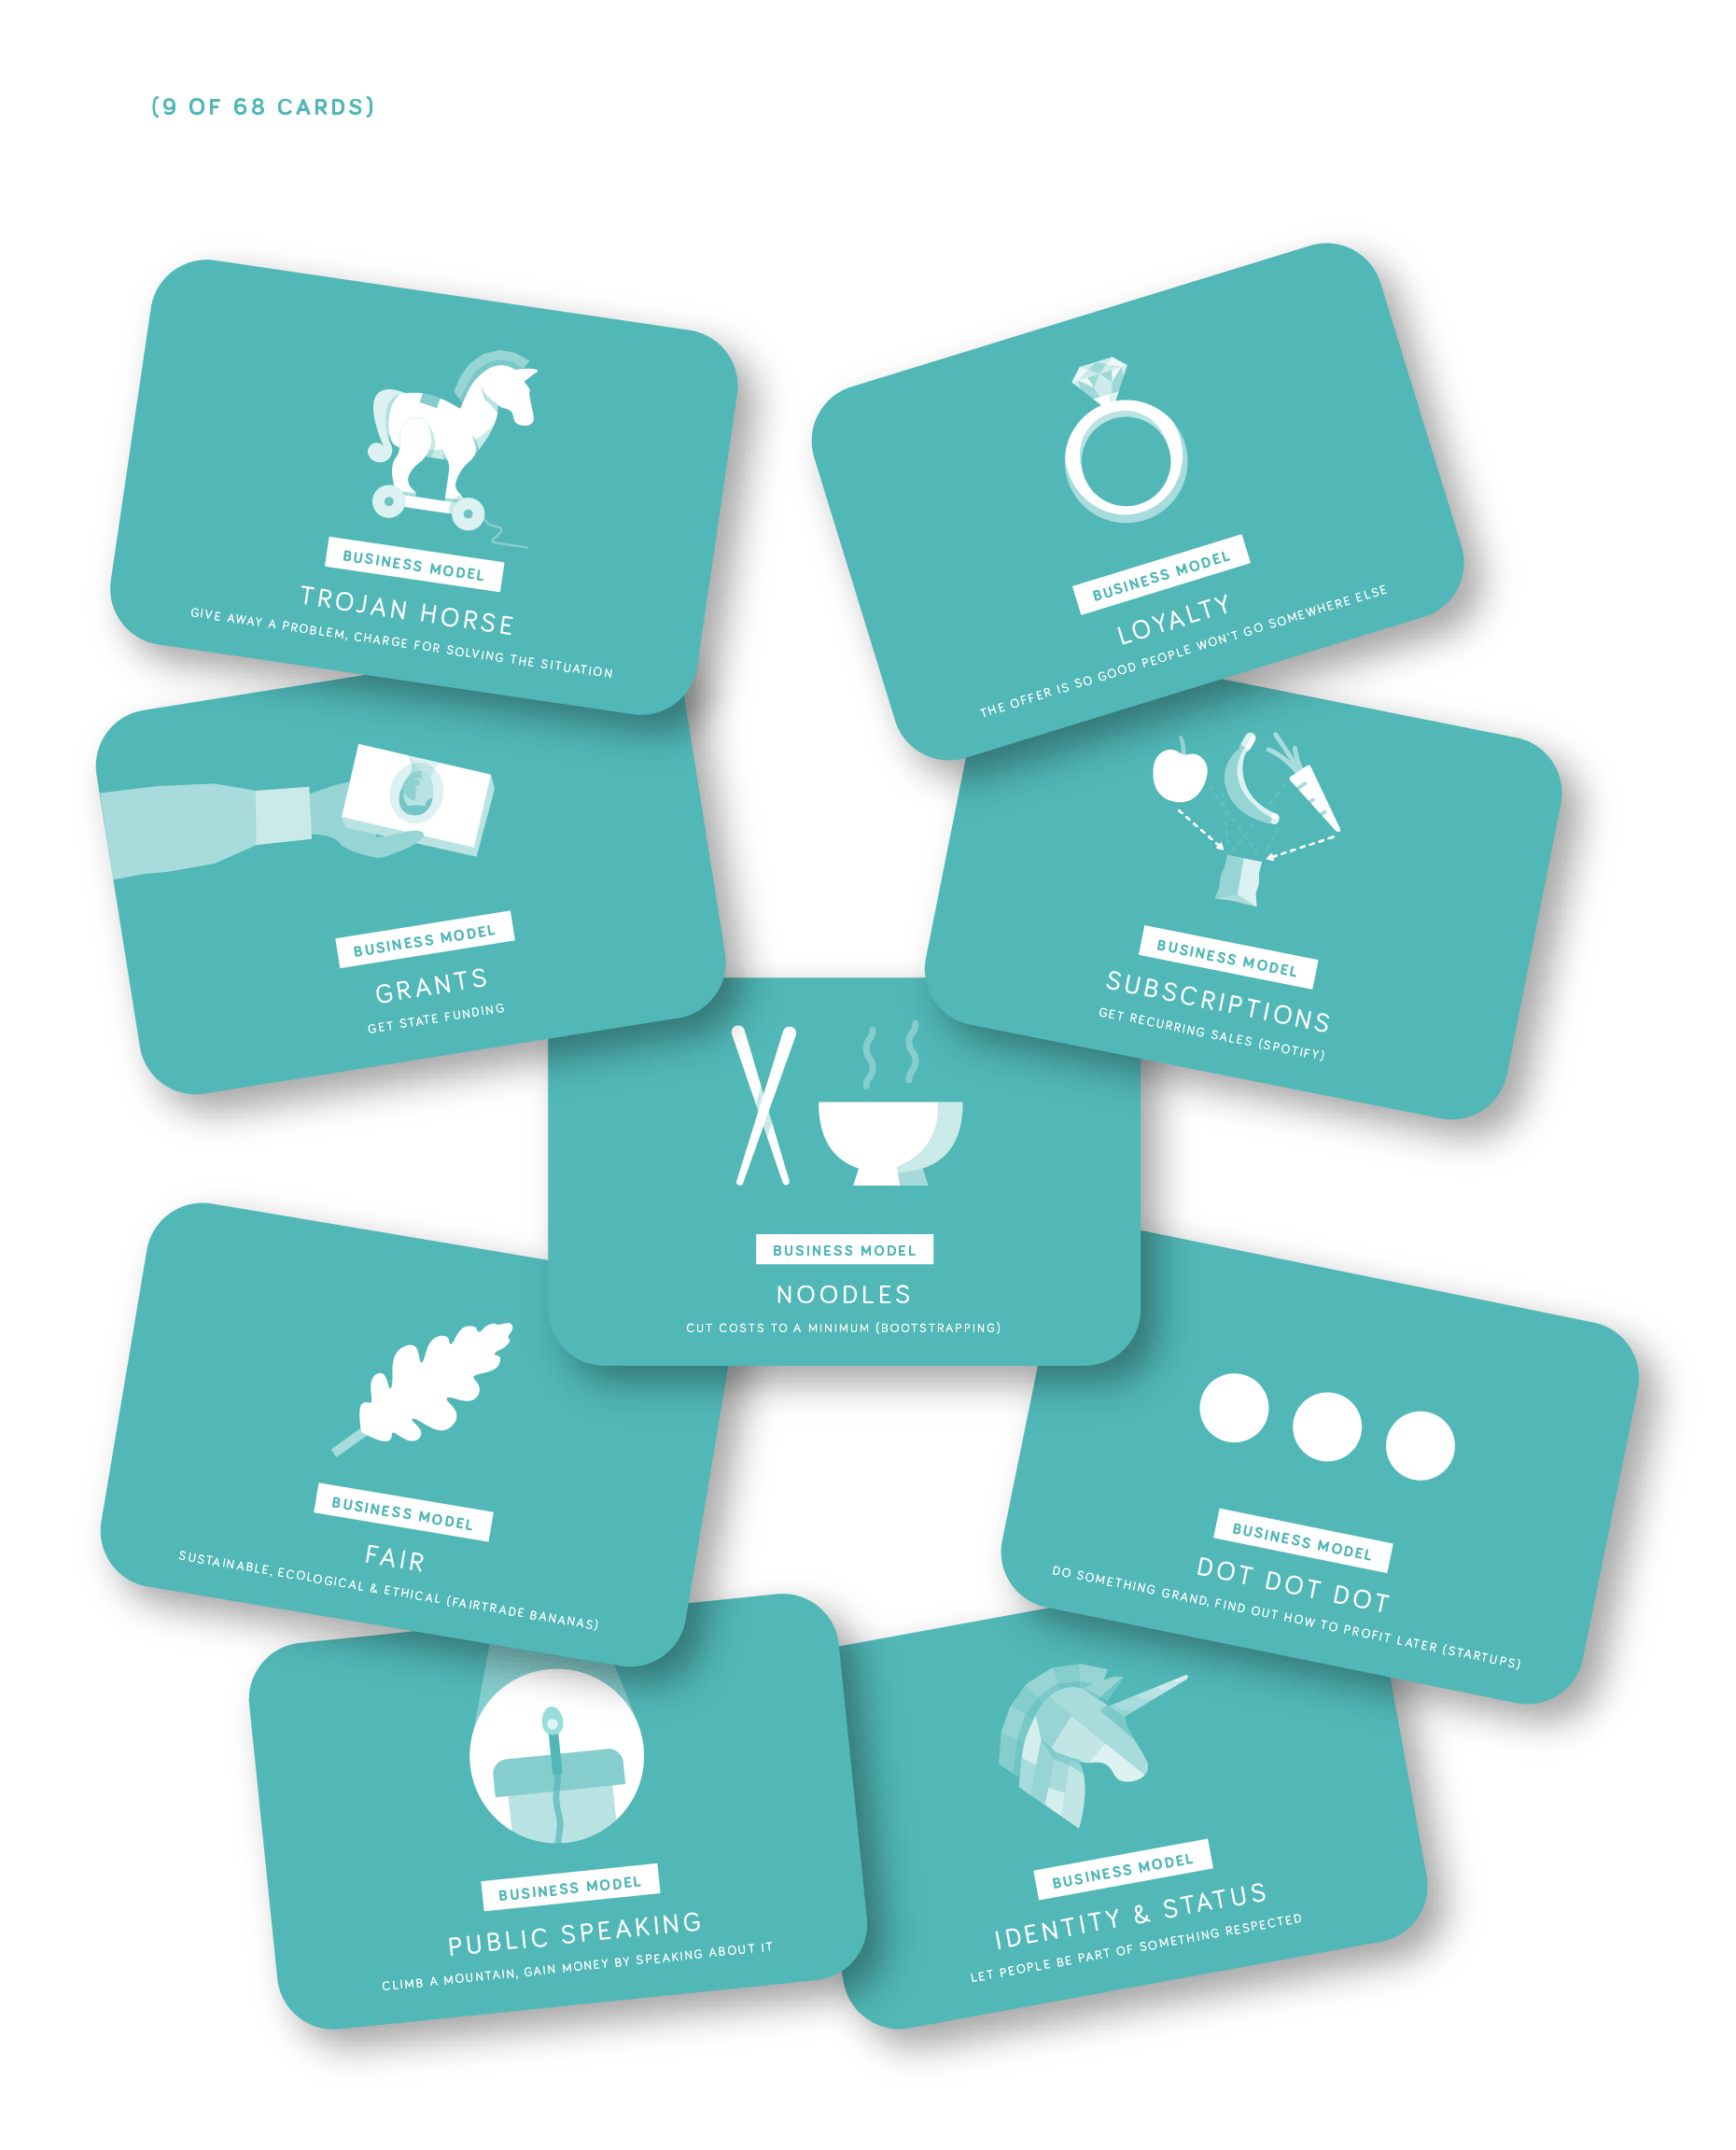 Cards: MethodKit with Business Models